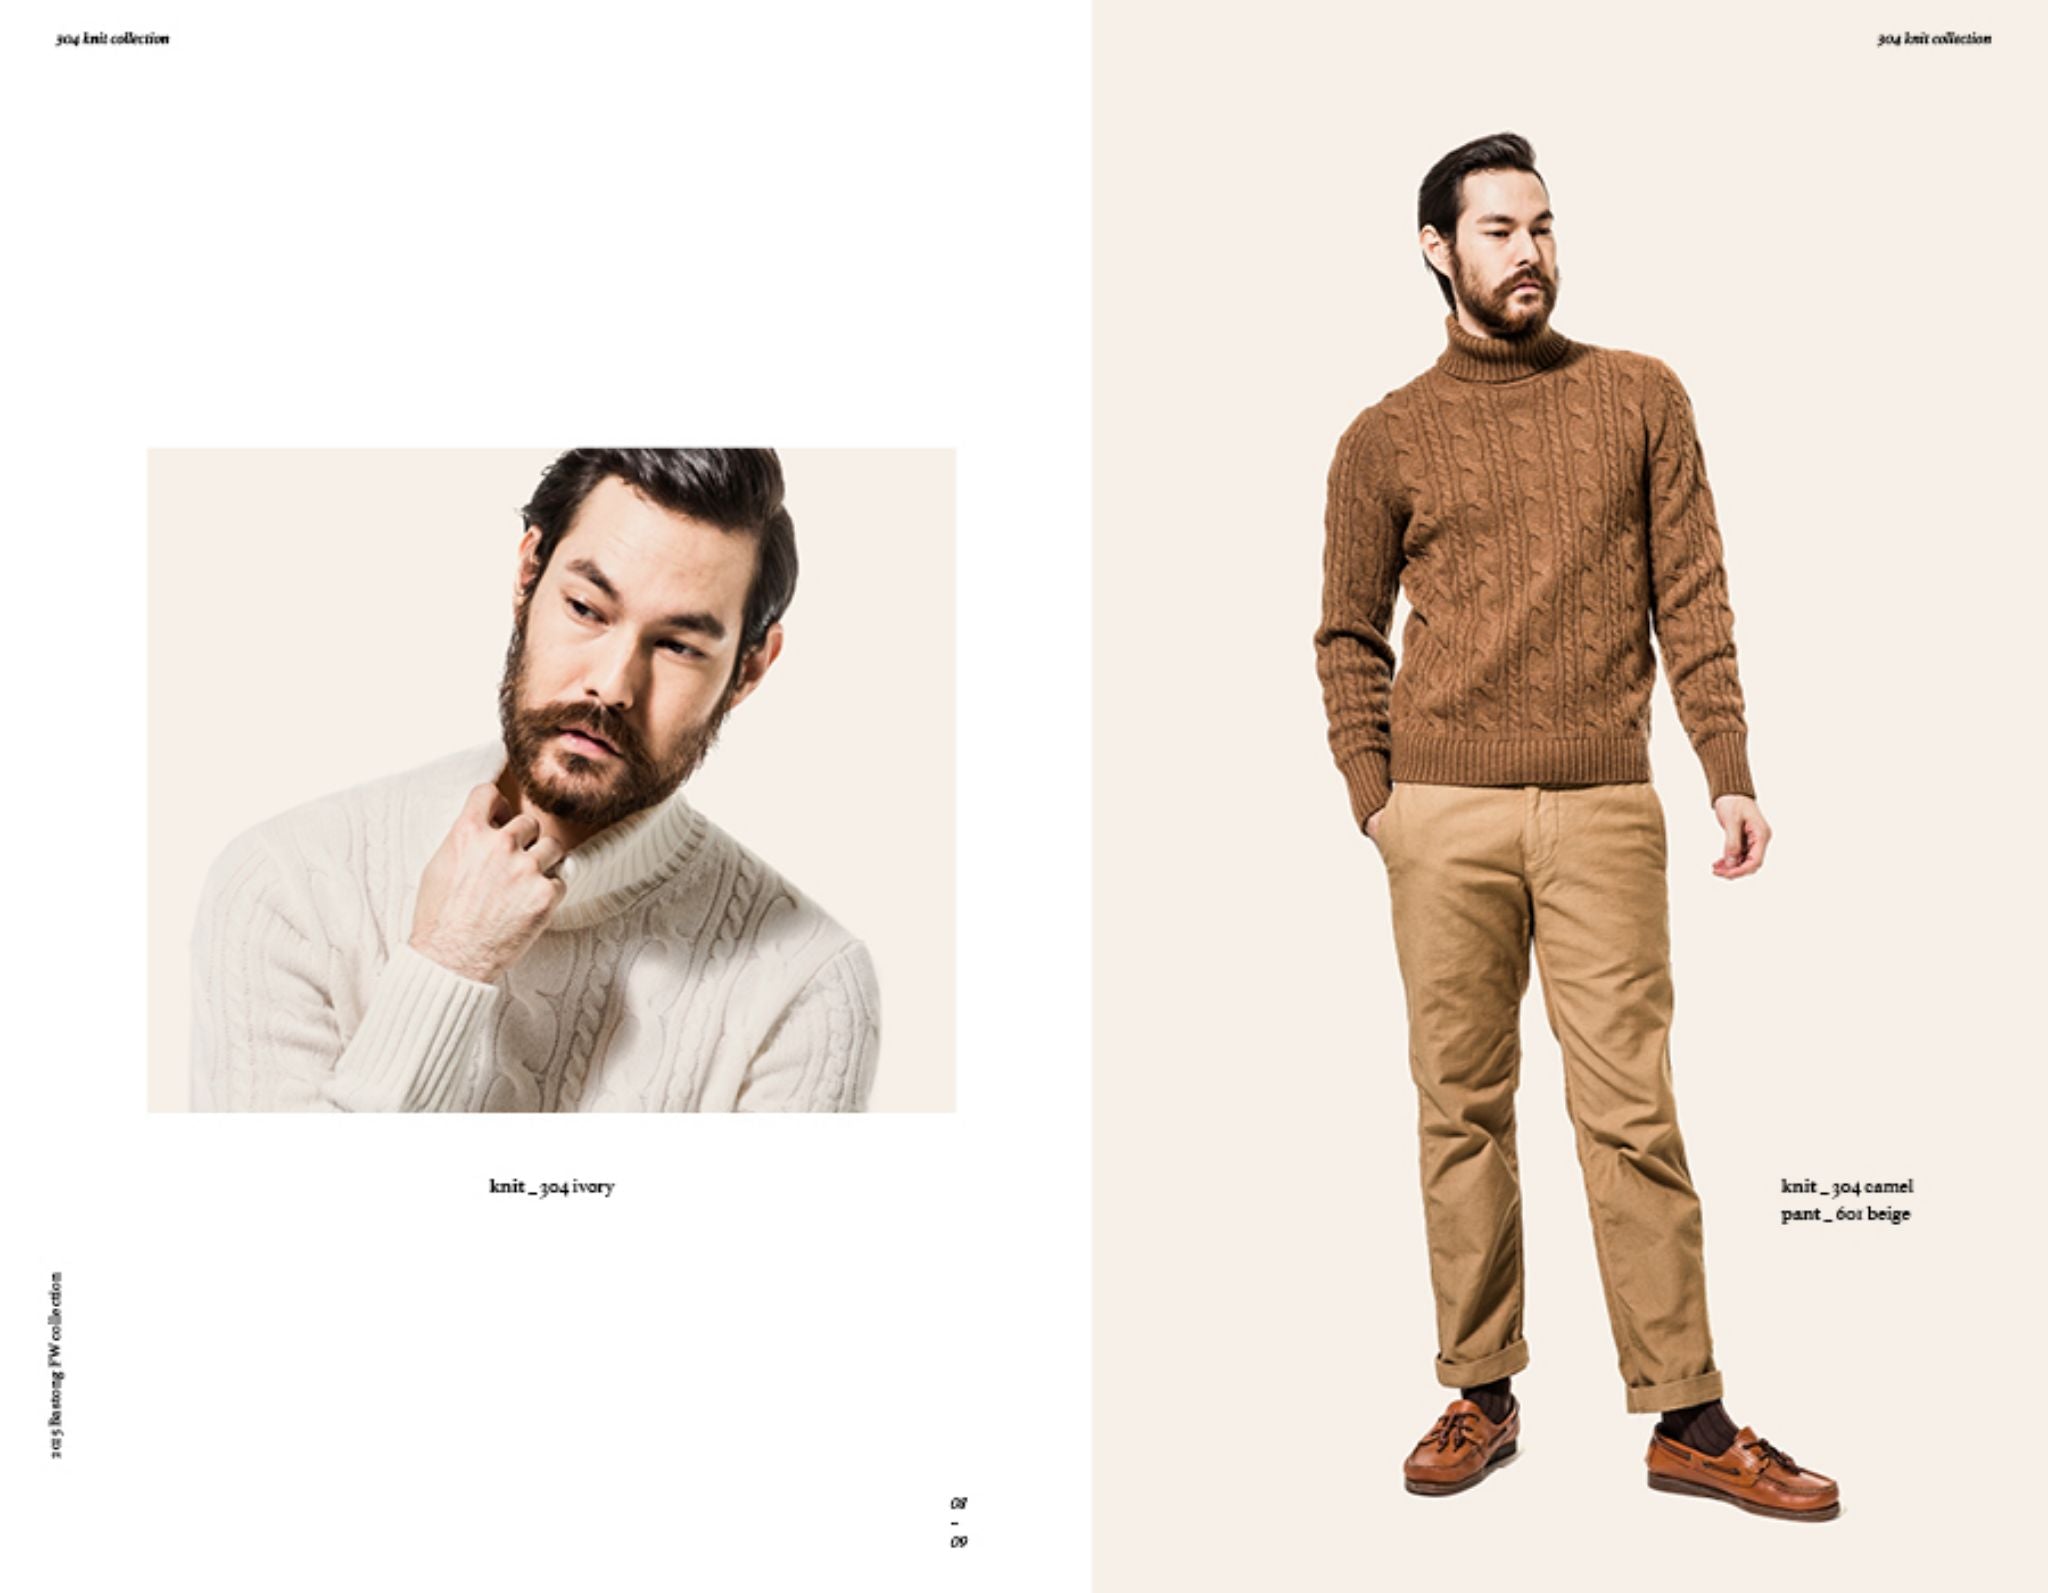 Bastong fw15 lookbook - roll neck sweater with cotton chinos